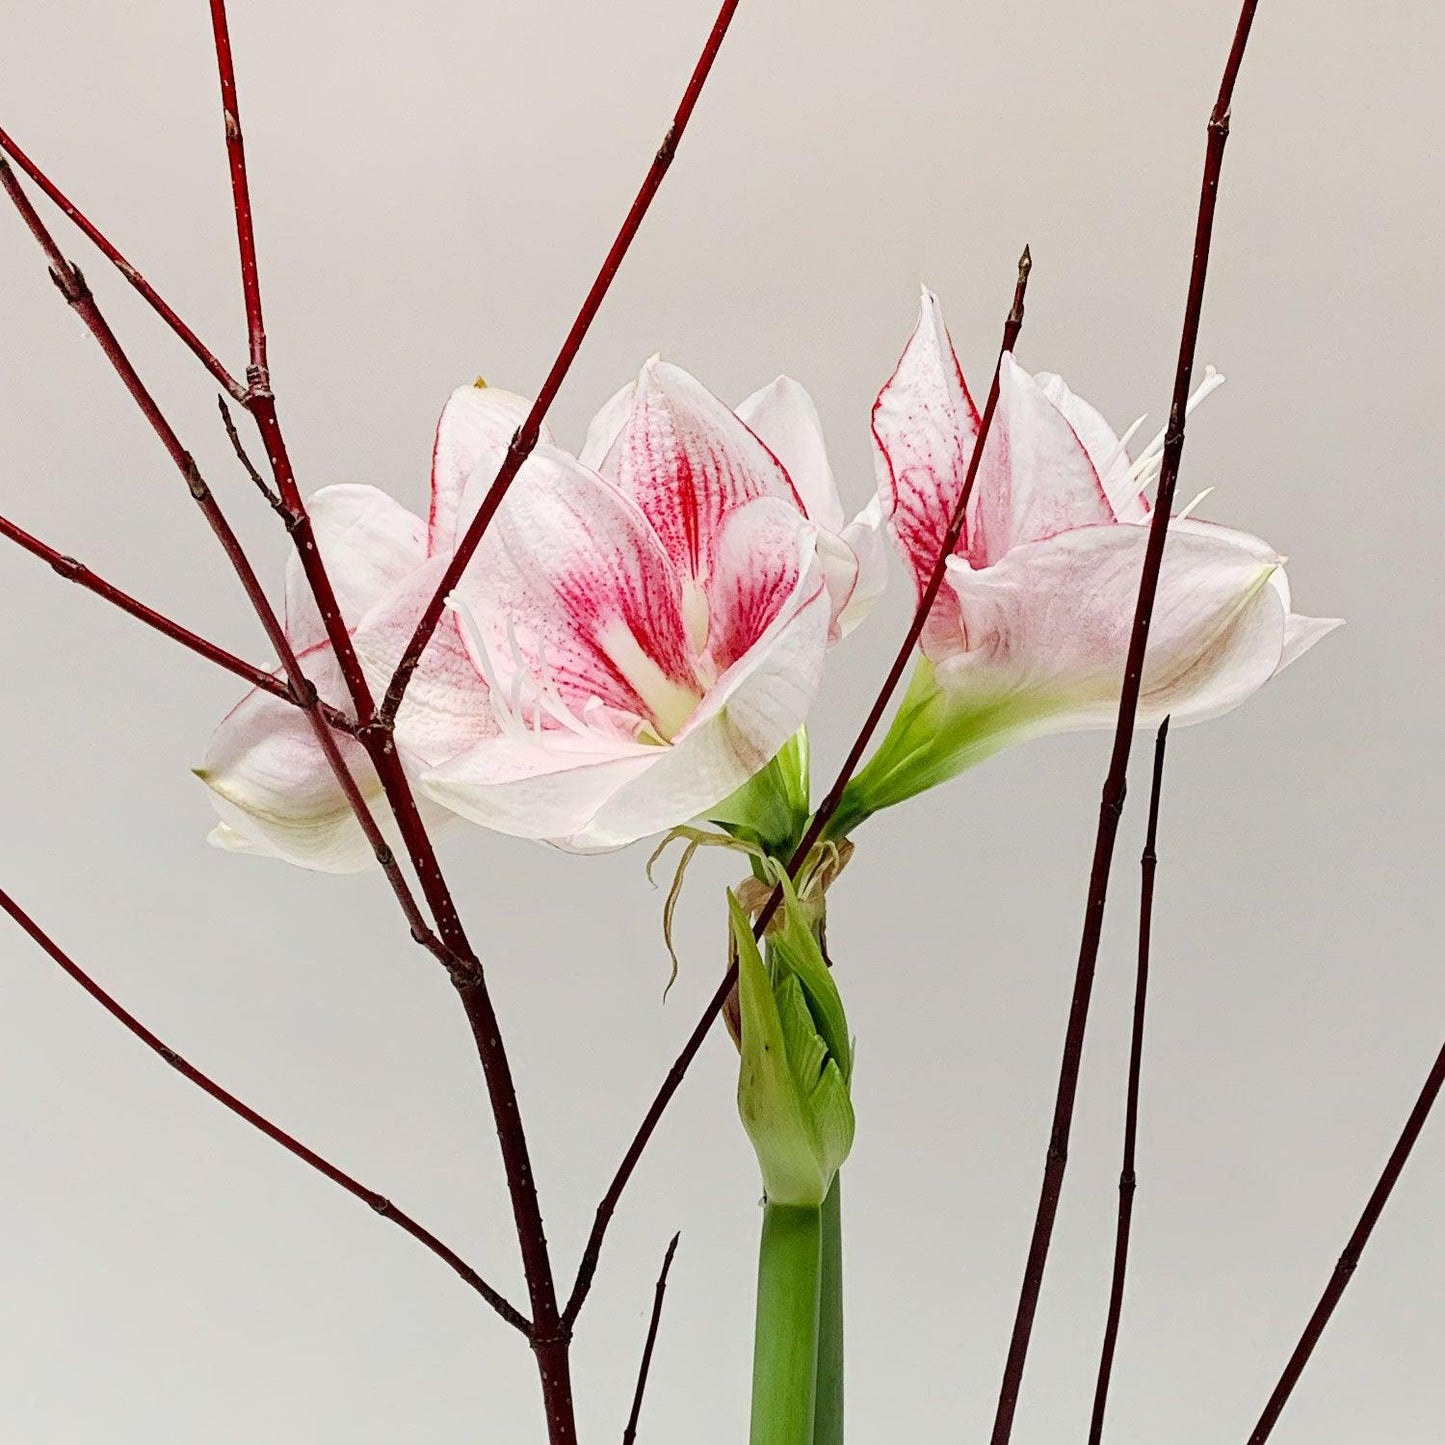 A potted amaryllis flower with long, slender red branches extending outward, set against a neutral background. Order online for flowers from the best florist in Toronto near you.